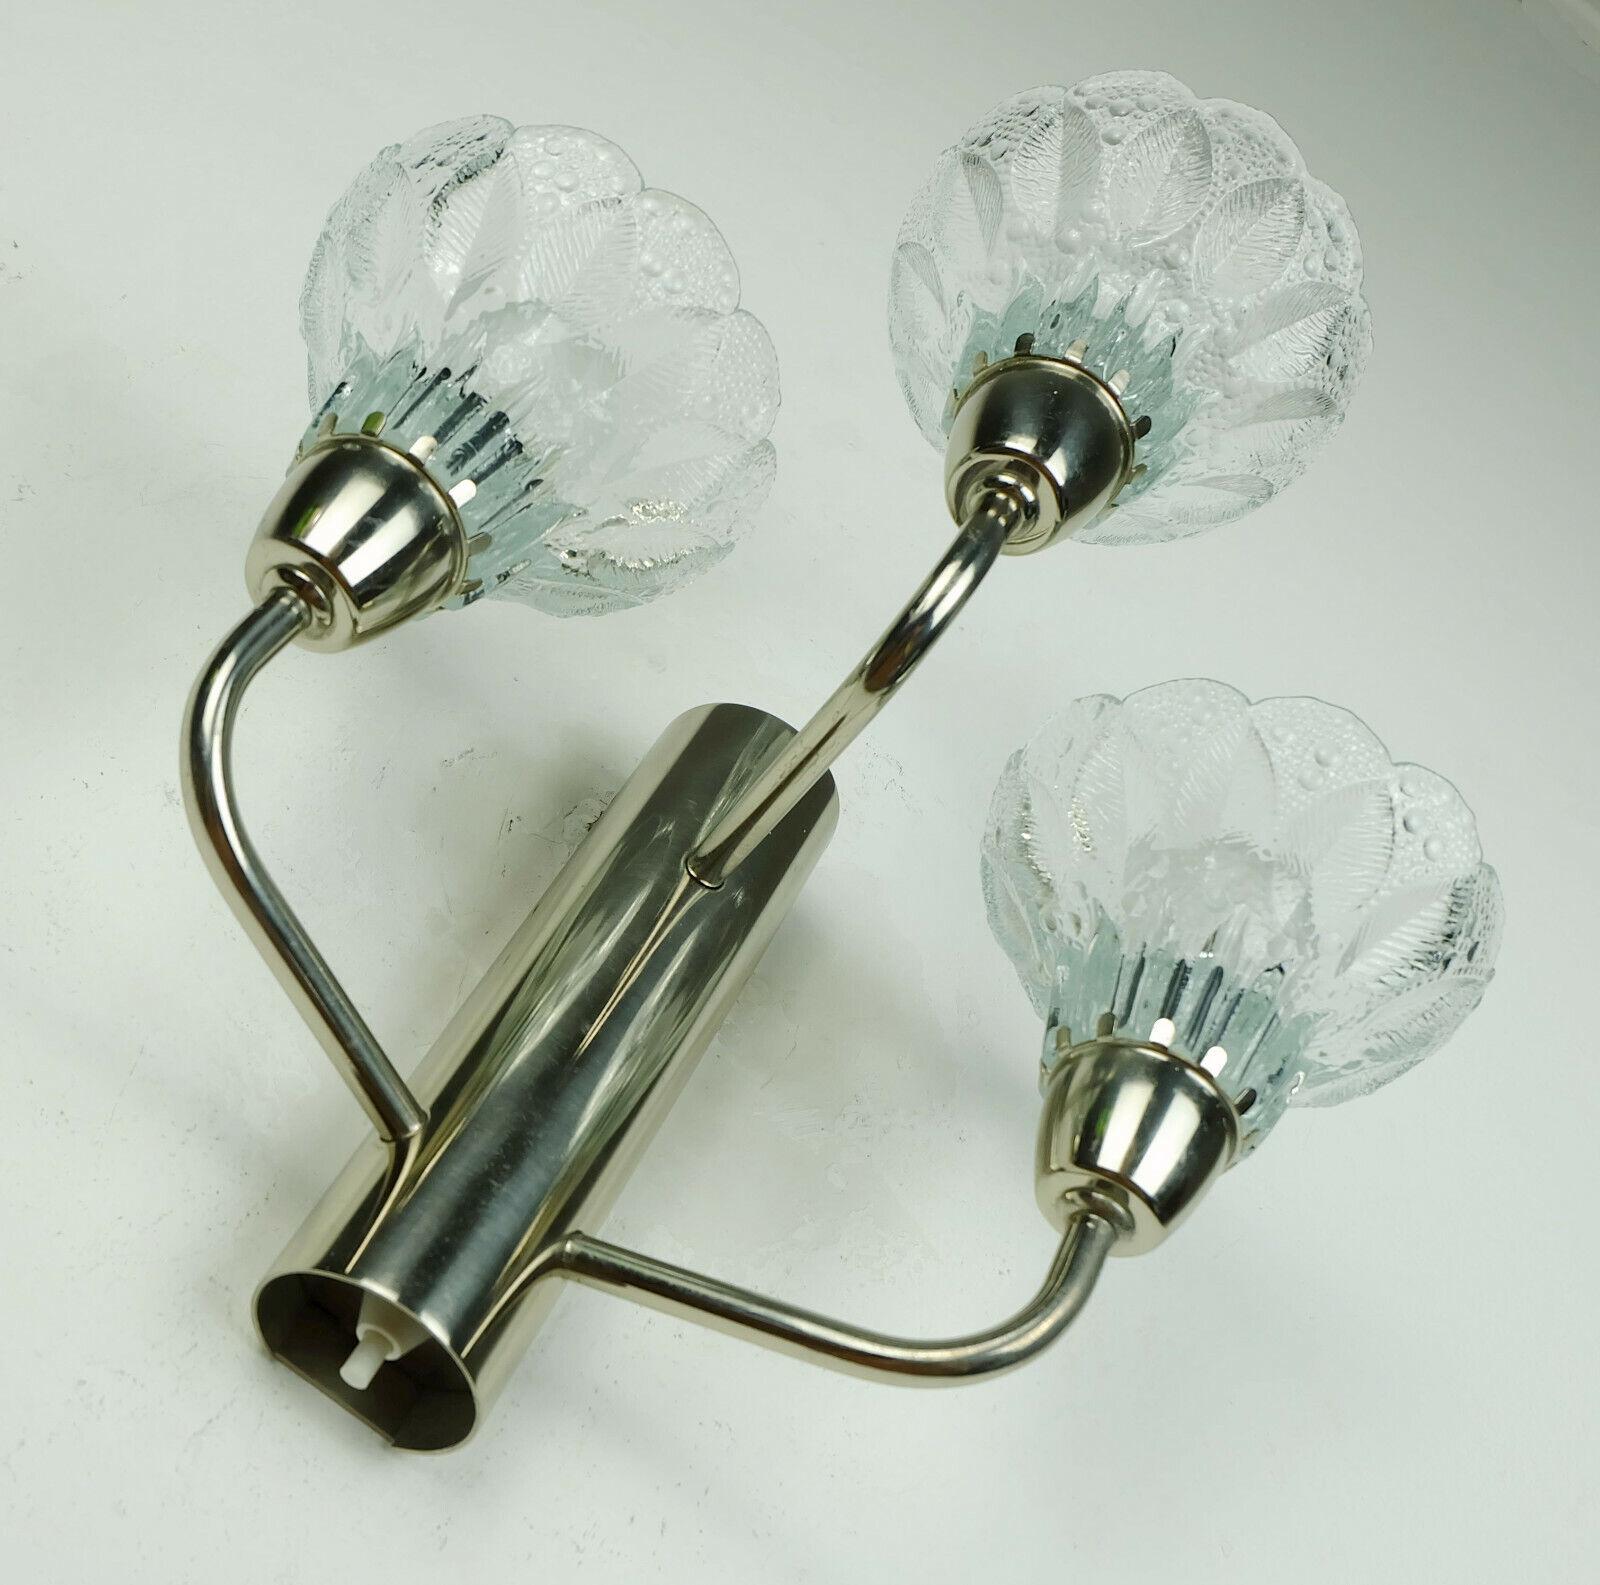 1970s 3-Light Sconce Wall Lamp Glass Blossom Shades and Chrome In Good Condition For Sale In Mannheim, DE